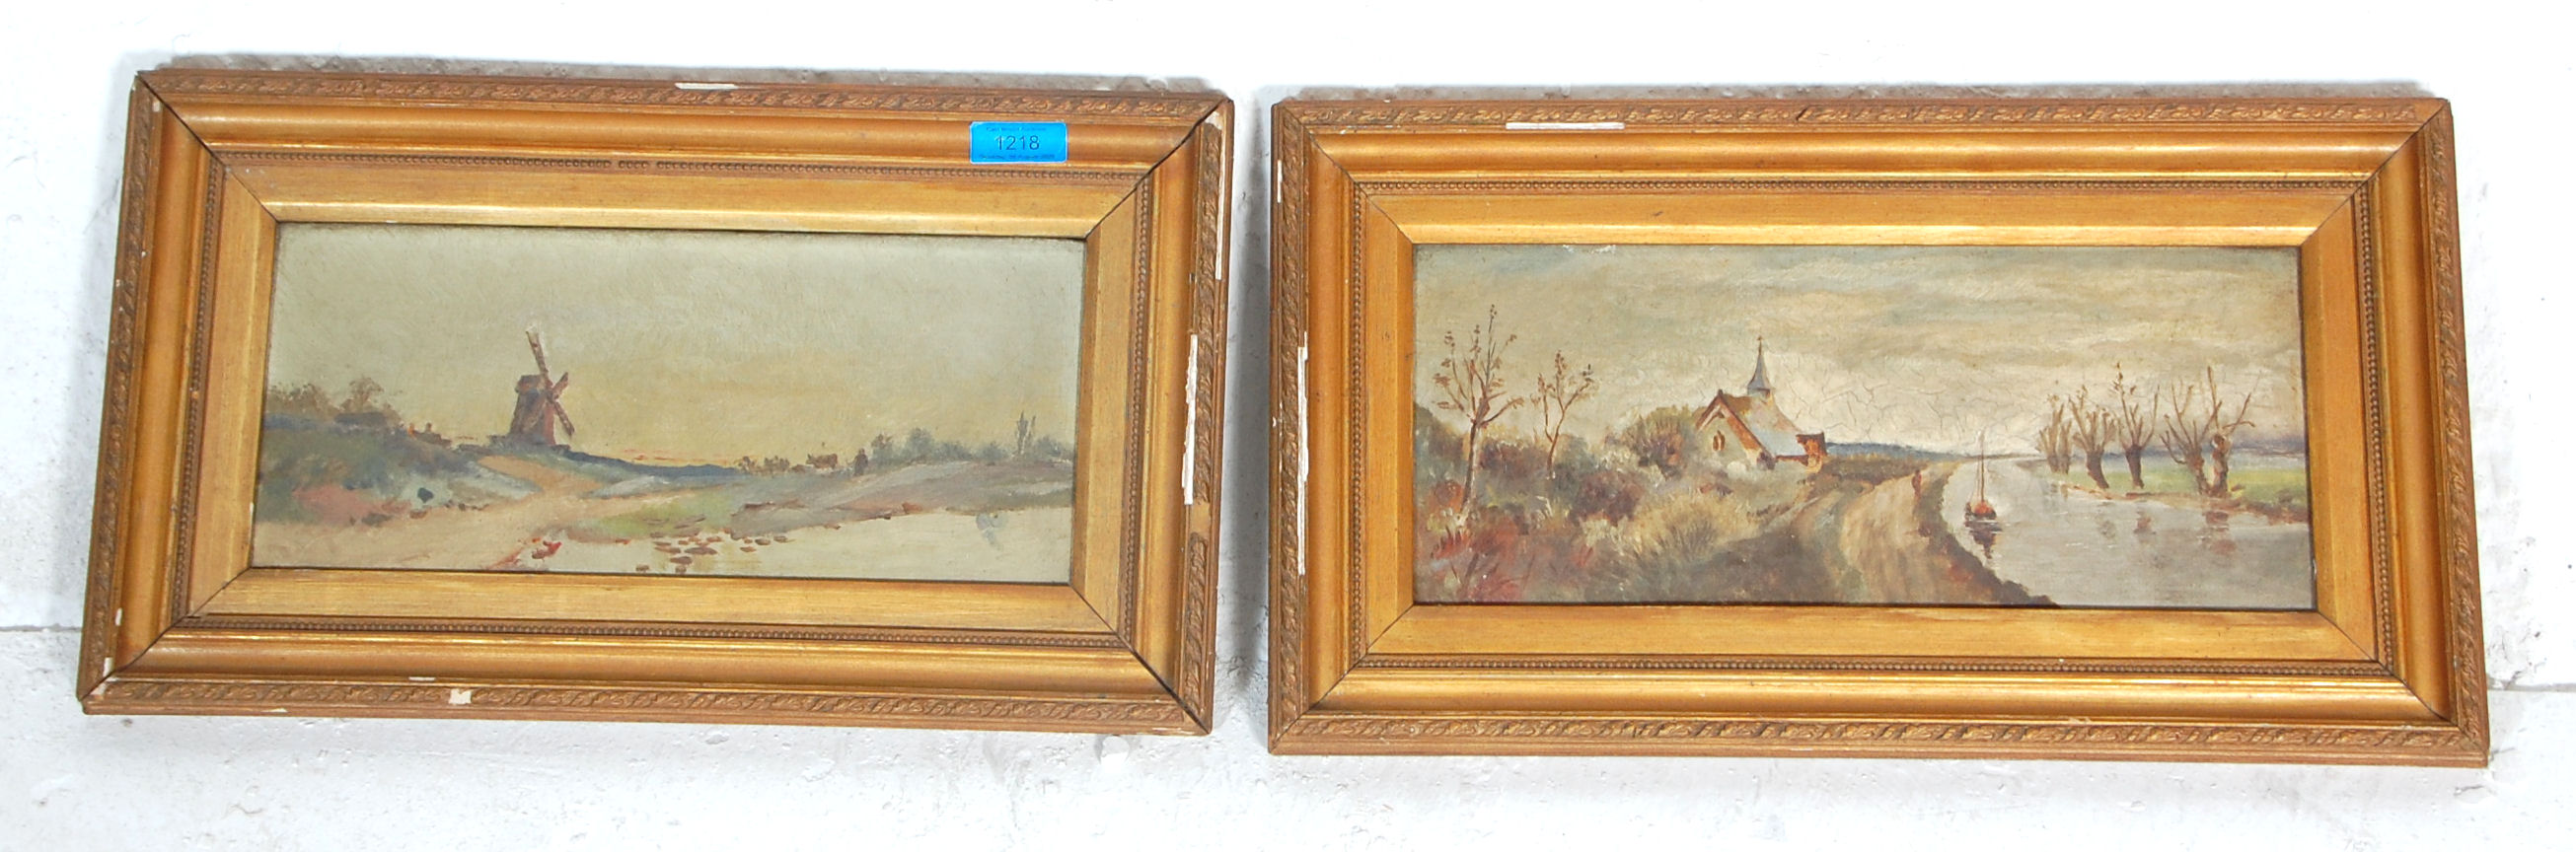 A pair of early 20th Century oil on canvas landsca